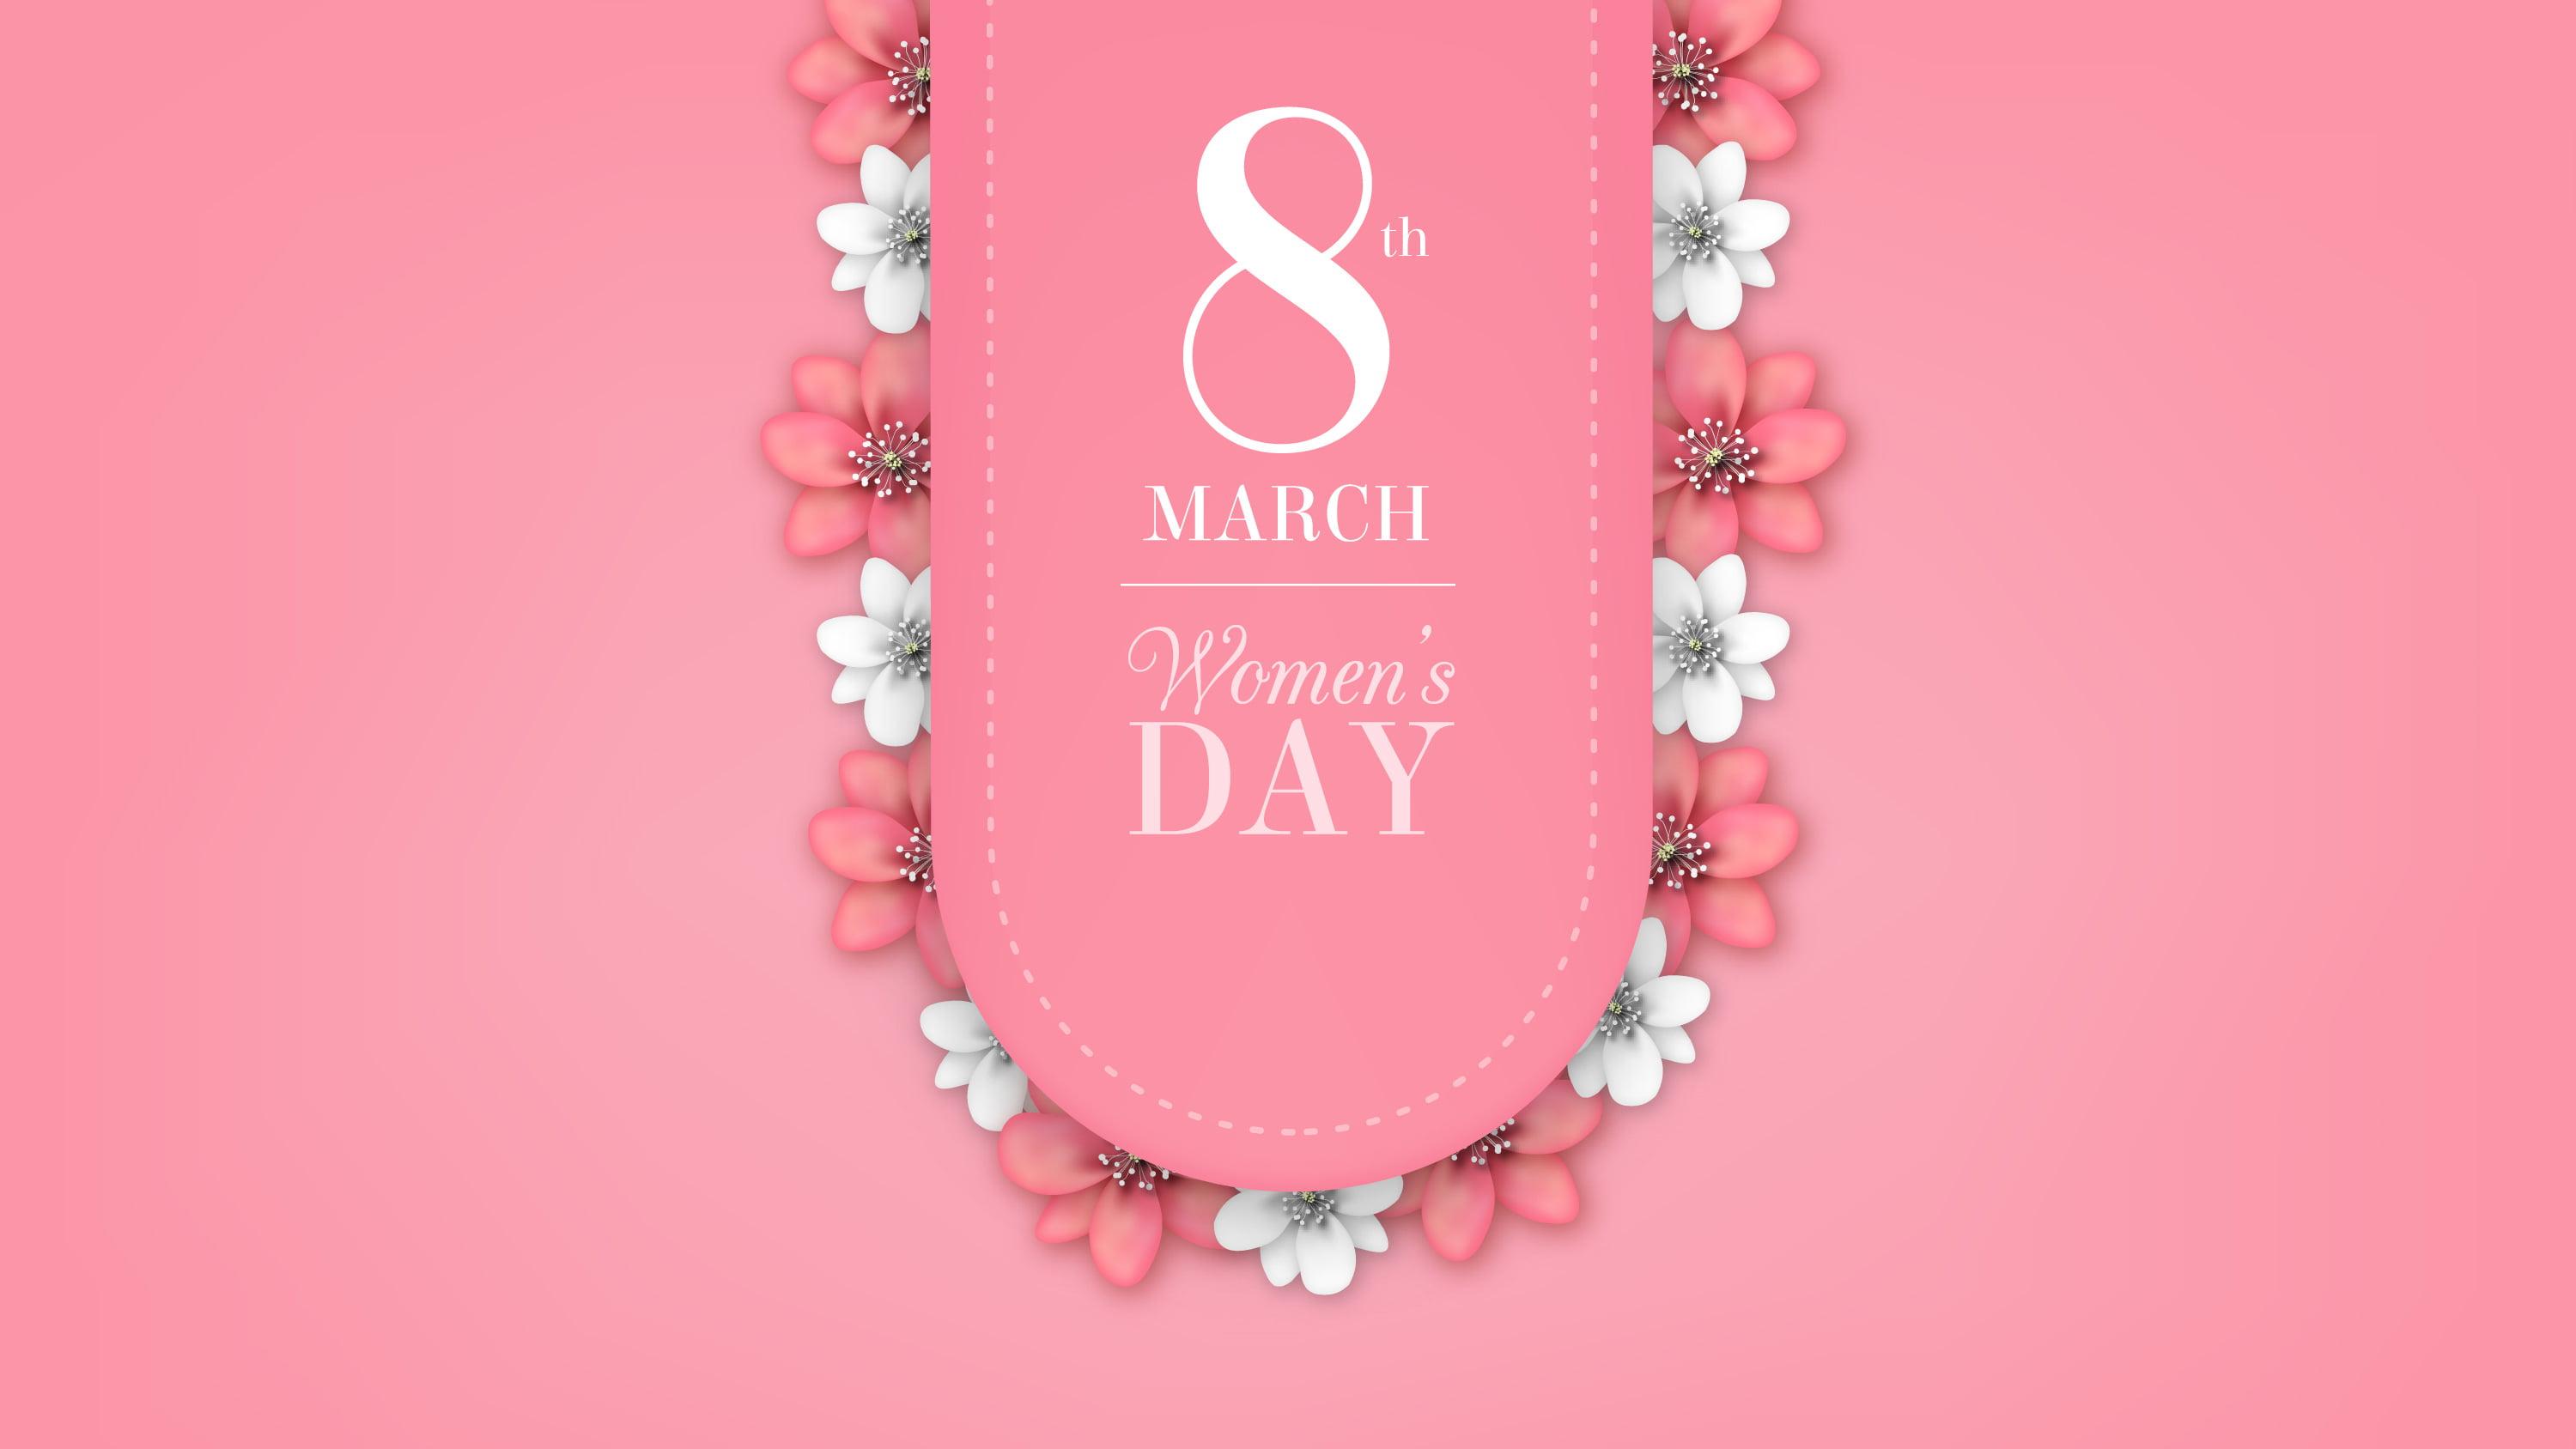 8th March women's day illustration HD wallpaper